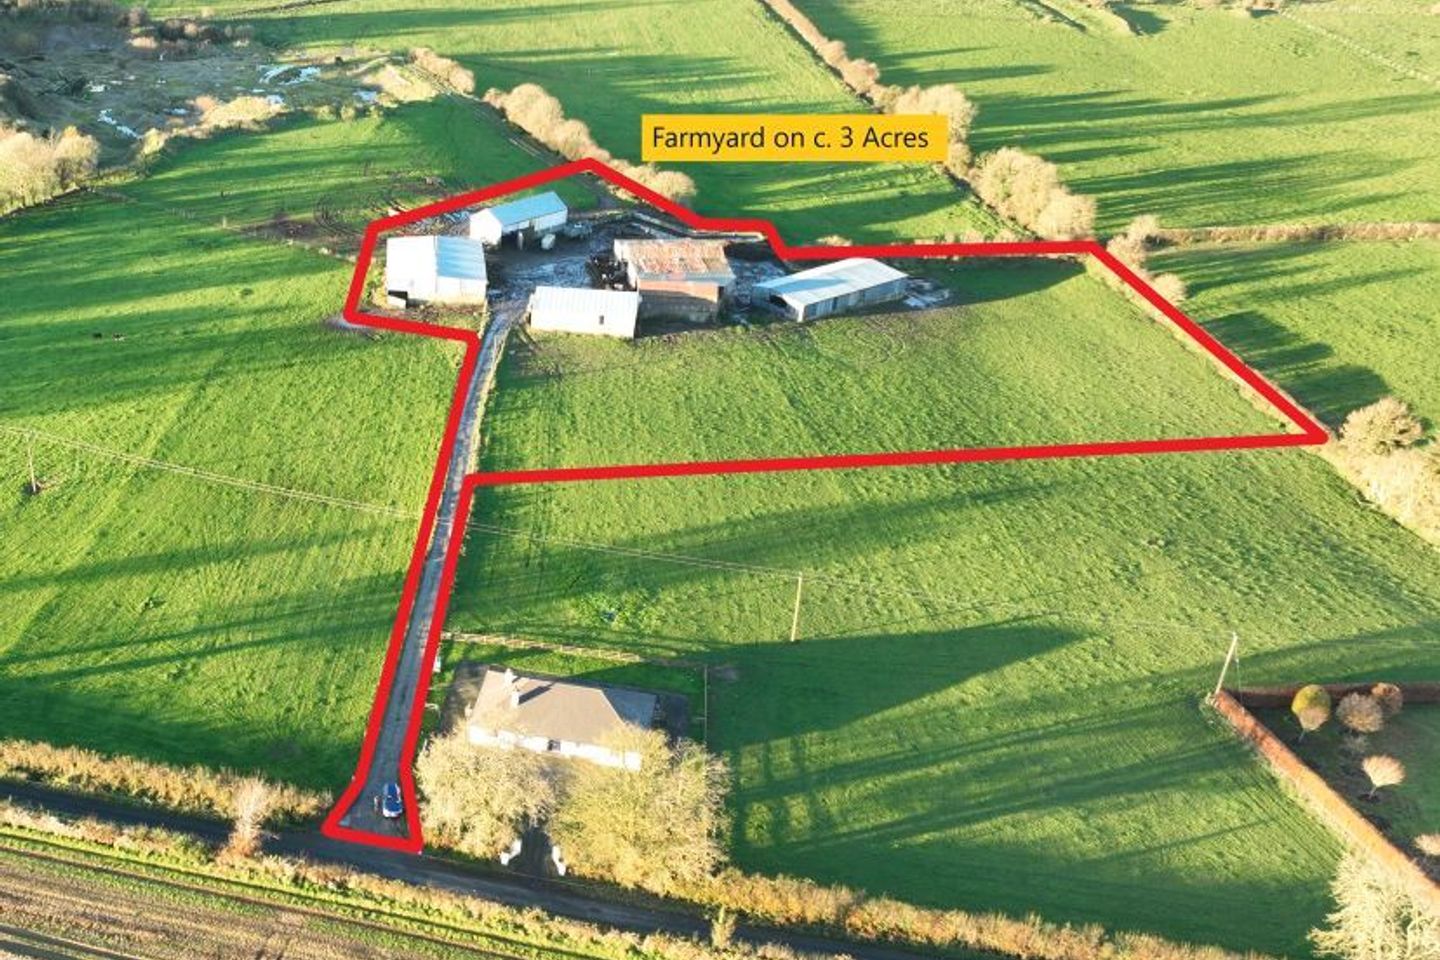 Farmyard on c. 3 Acres, Maplestown, Rathvilly, Co. Carlow